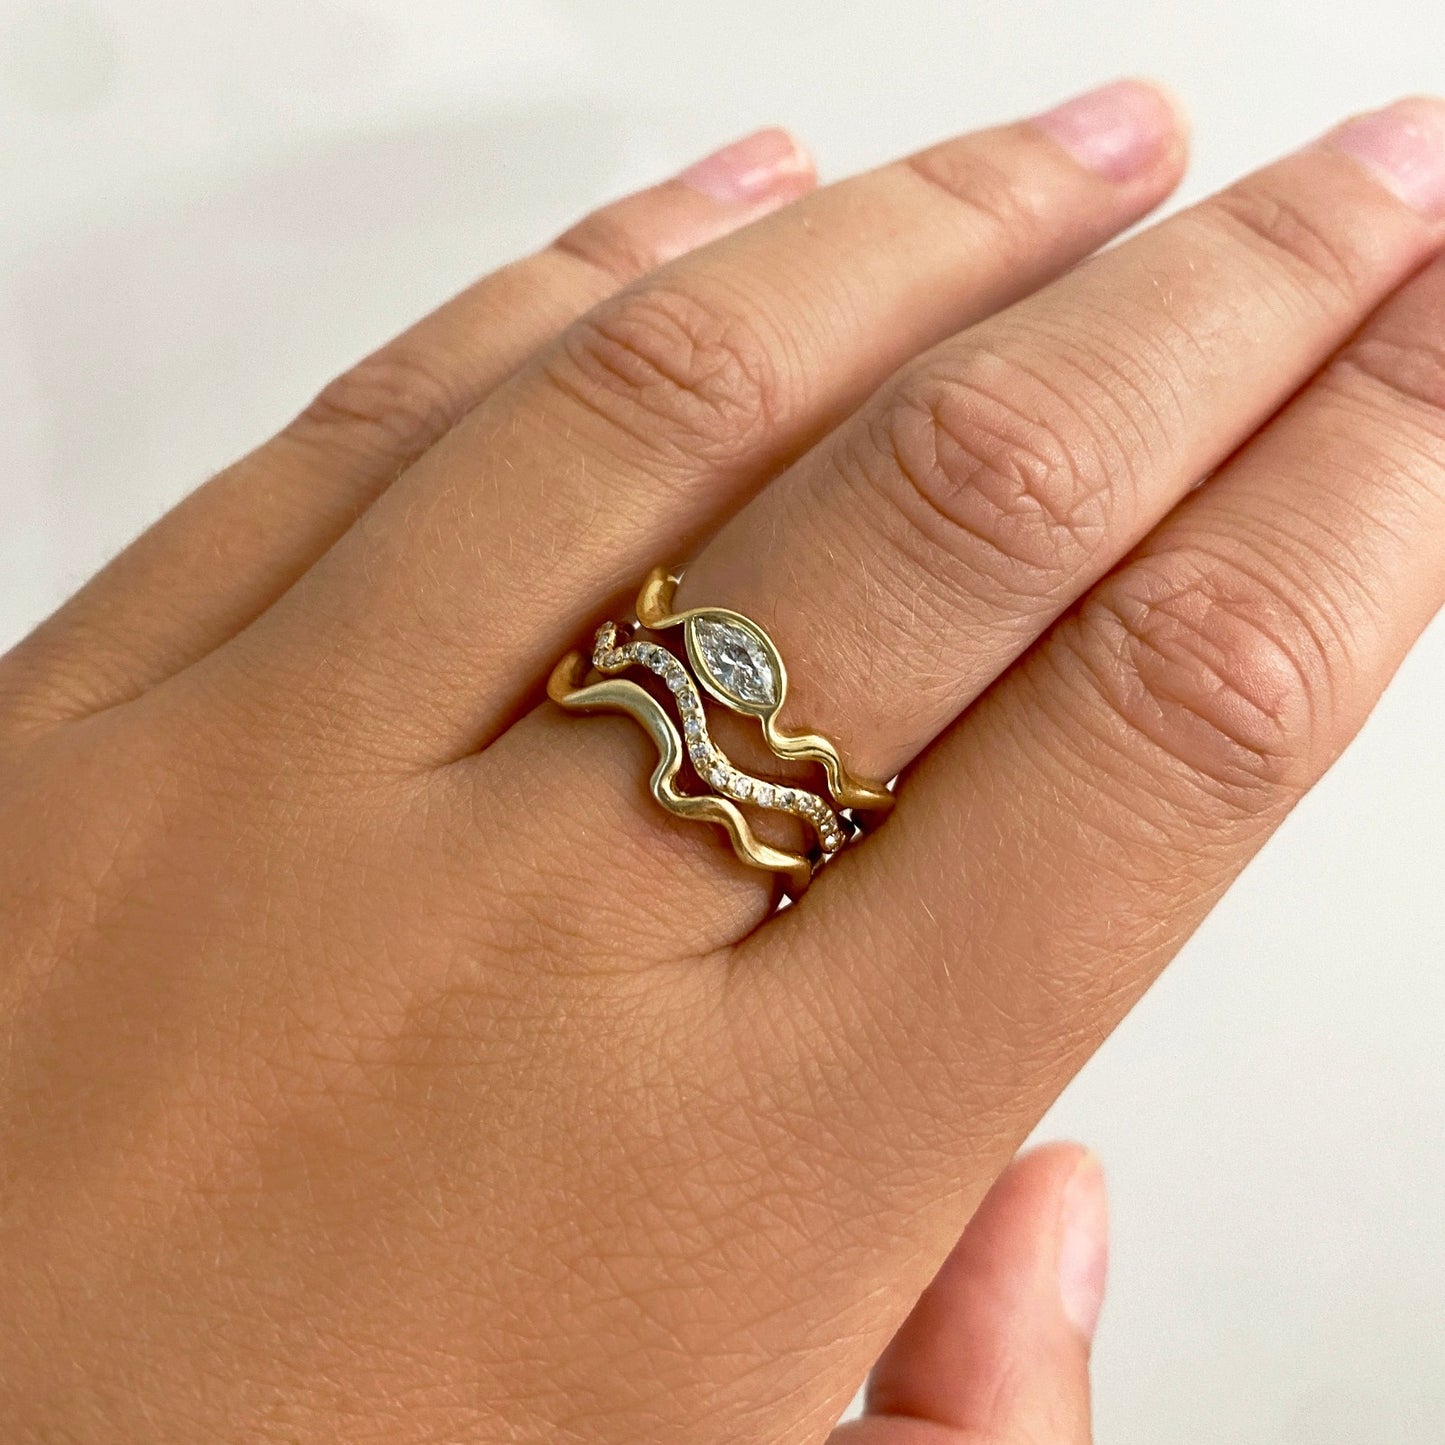 14k gold Ripple Ring with Marquise Diamond styled on a hand